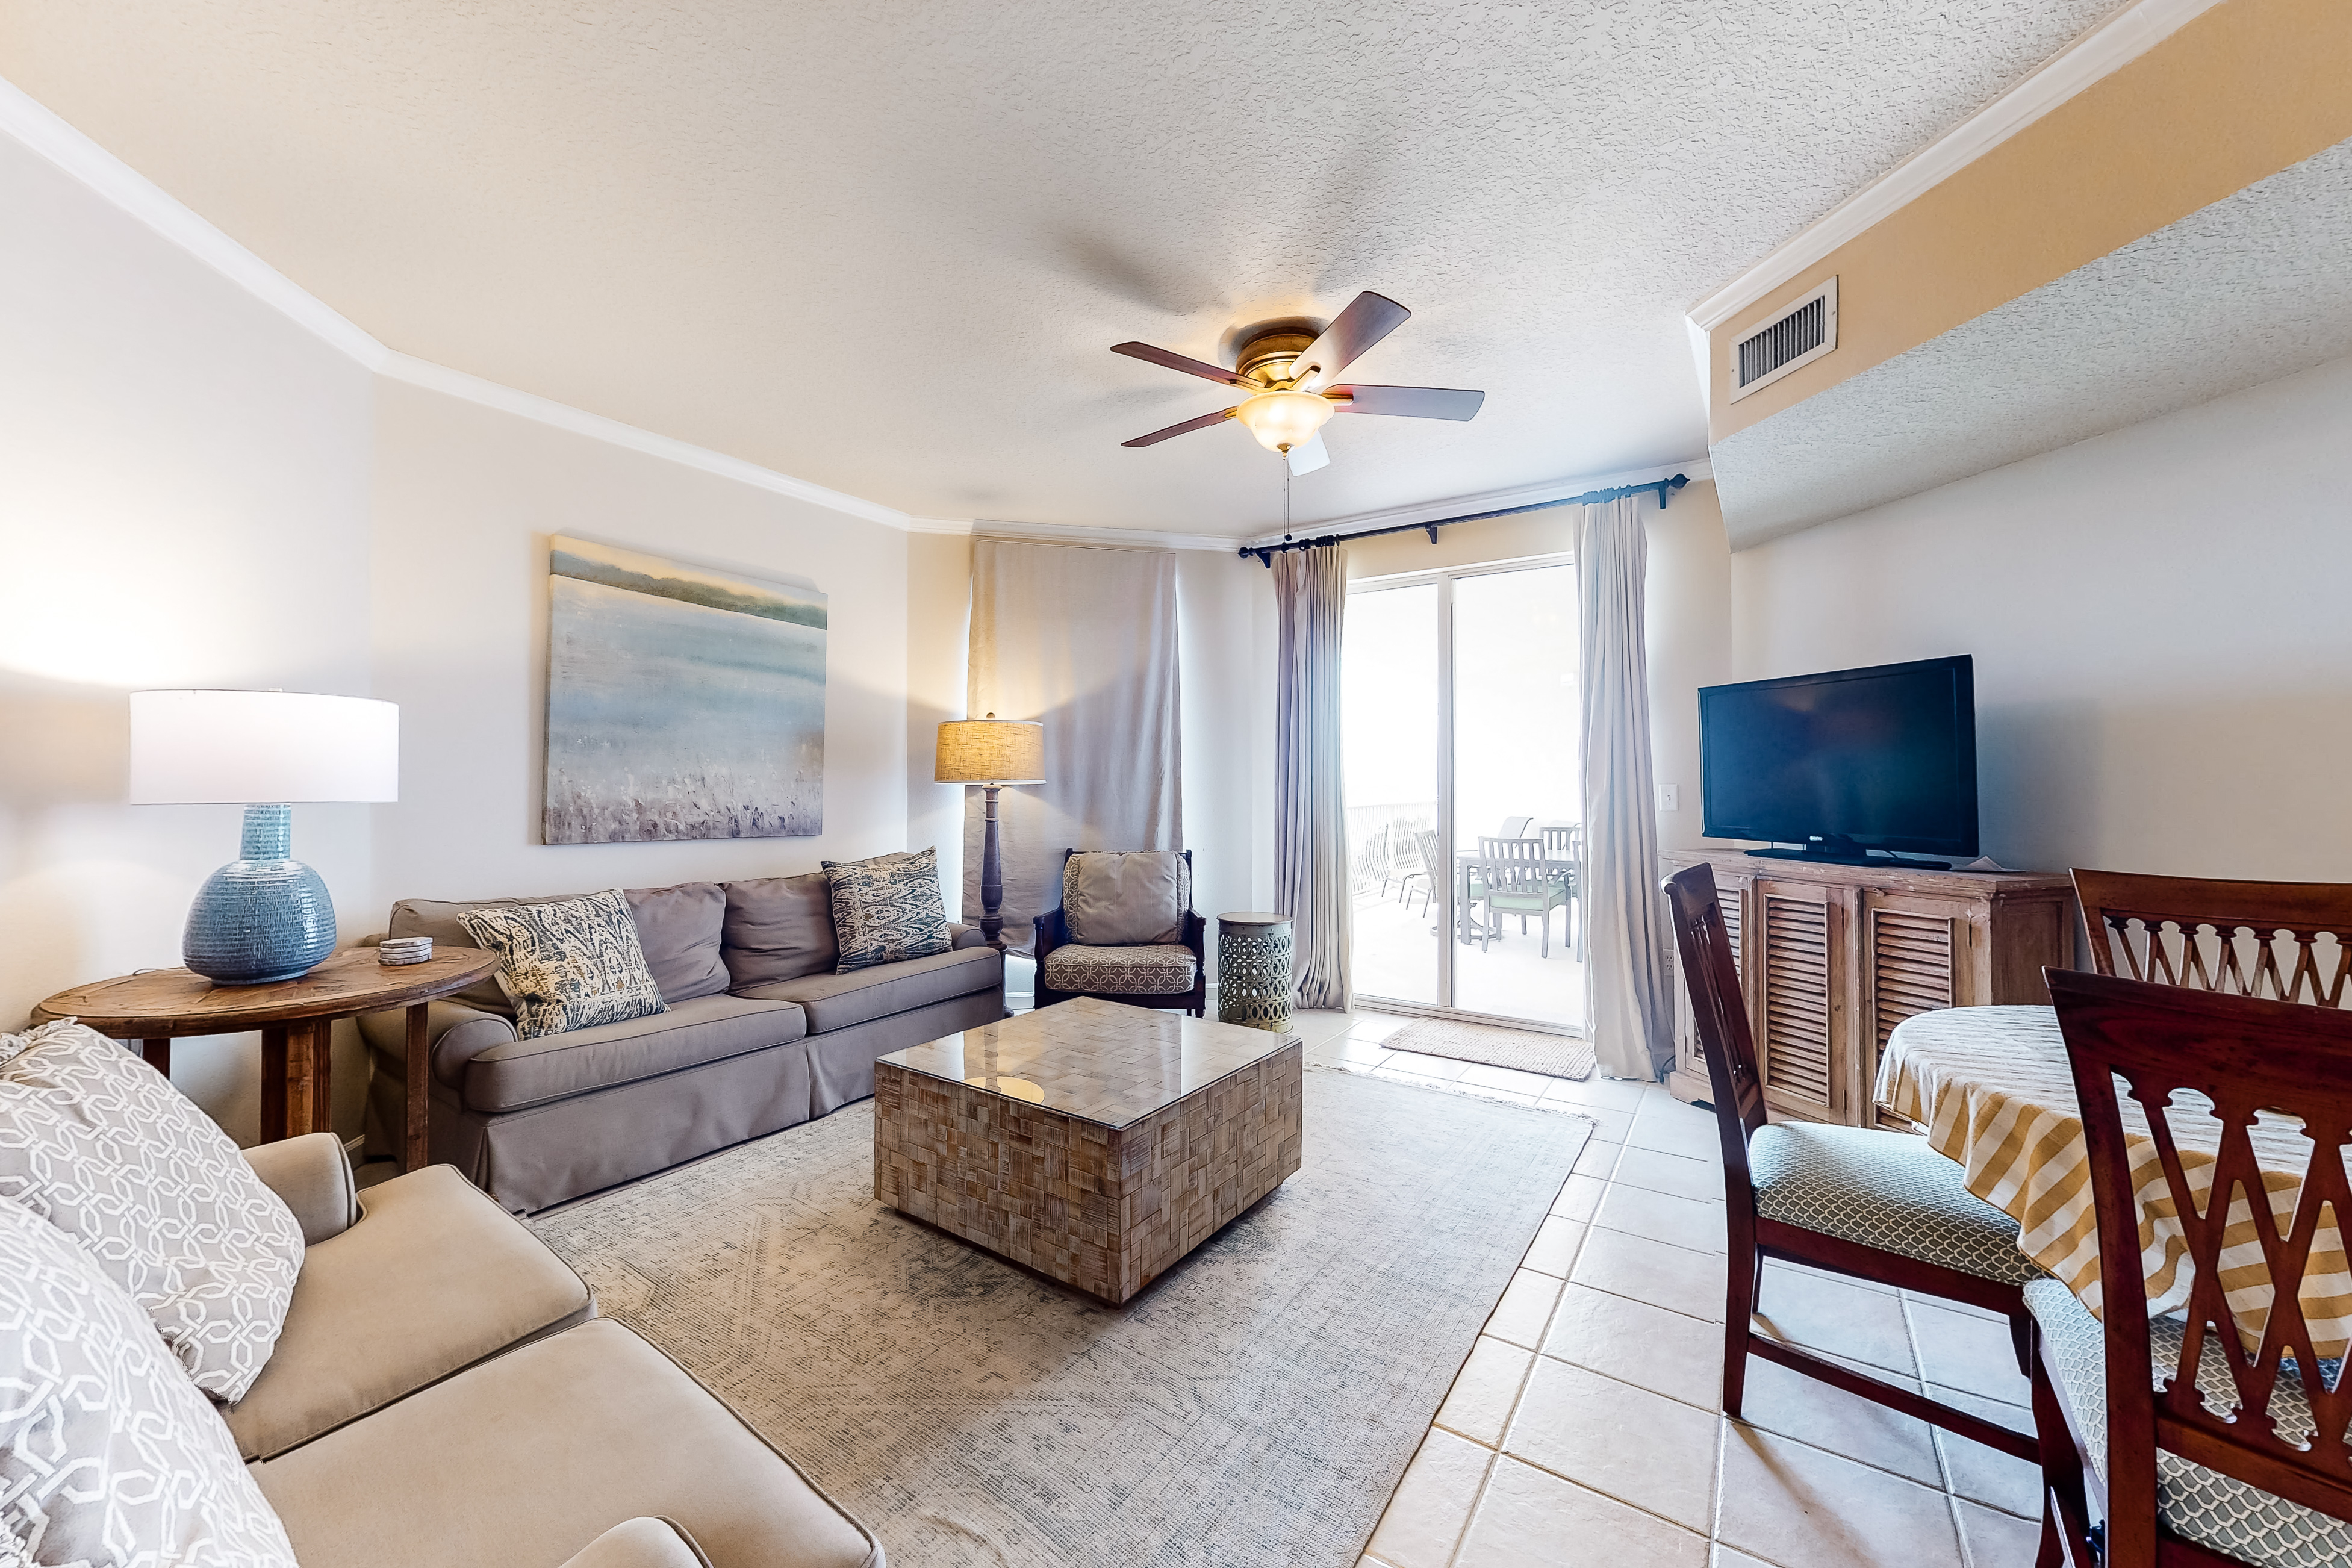 Dunes of Seagrove A303 Condo rental in Dunes of Seagrove in Highway 30-A Florida - #2